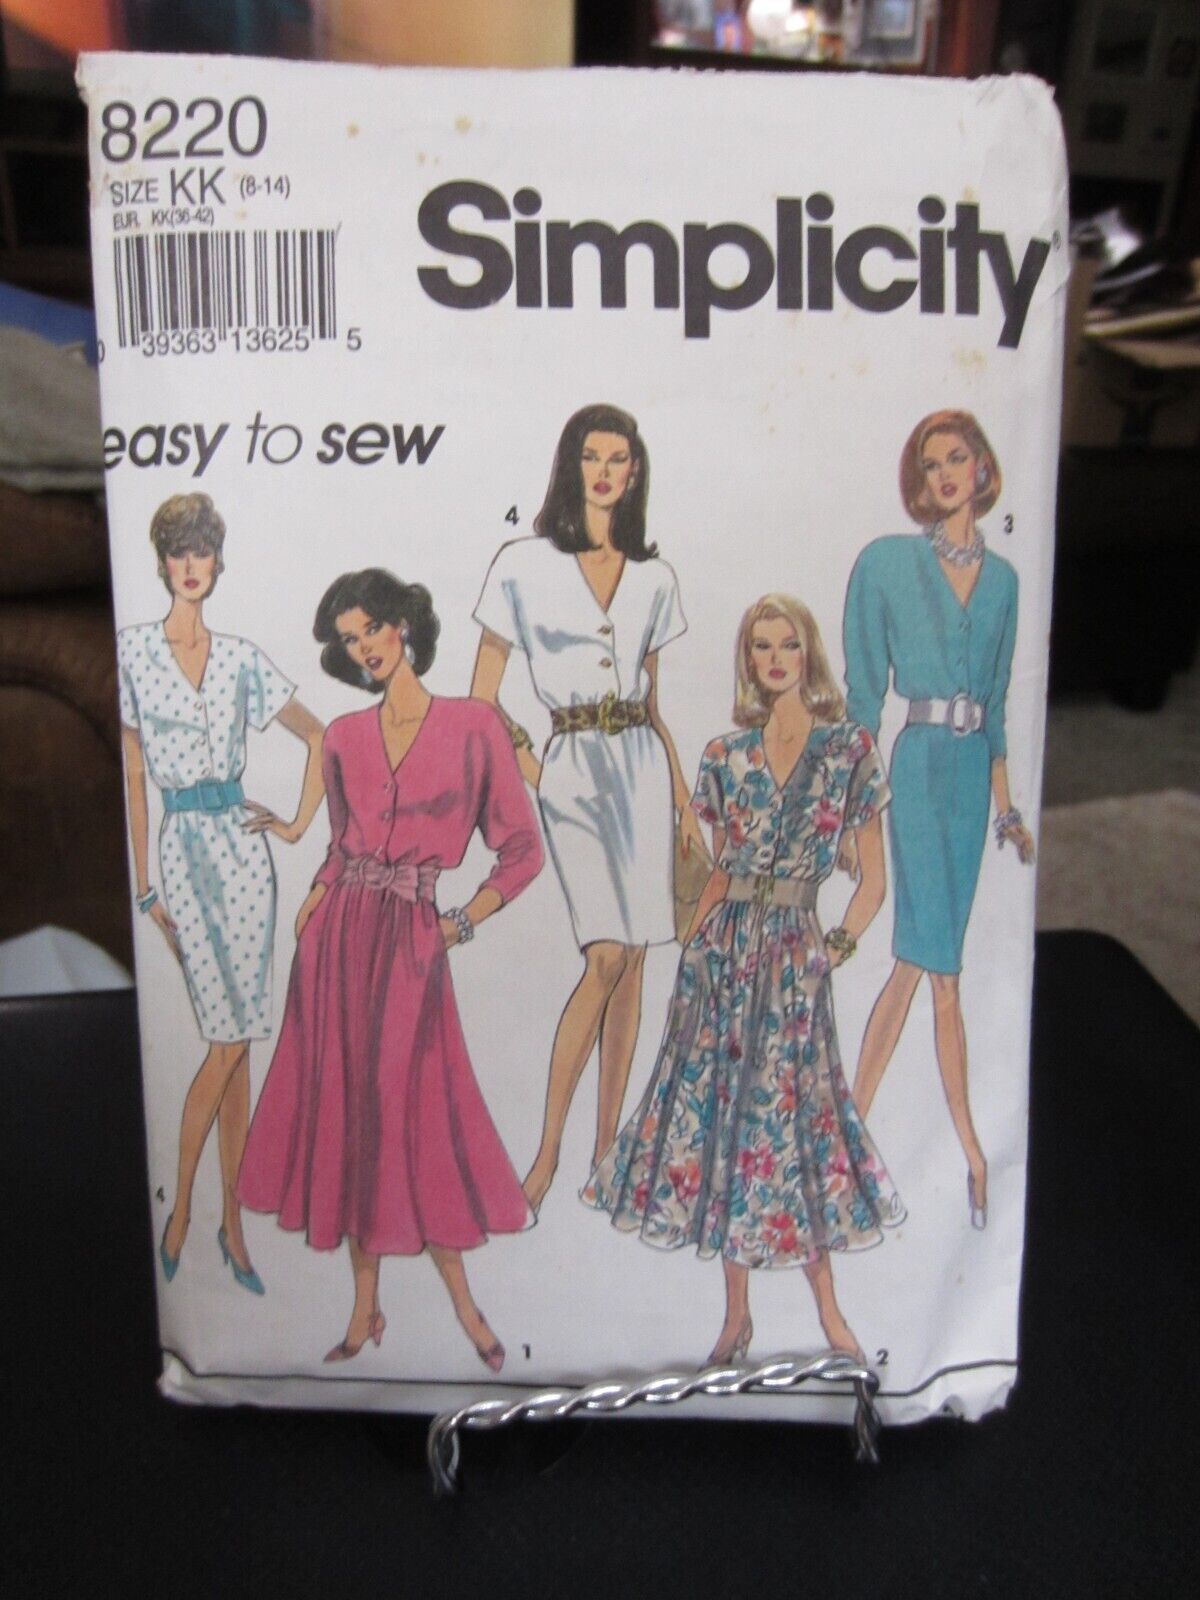 Primary image for Simplicity 8220 Misses Dress with Slim or Flared Skirt Pattern - Size 8-14